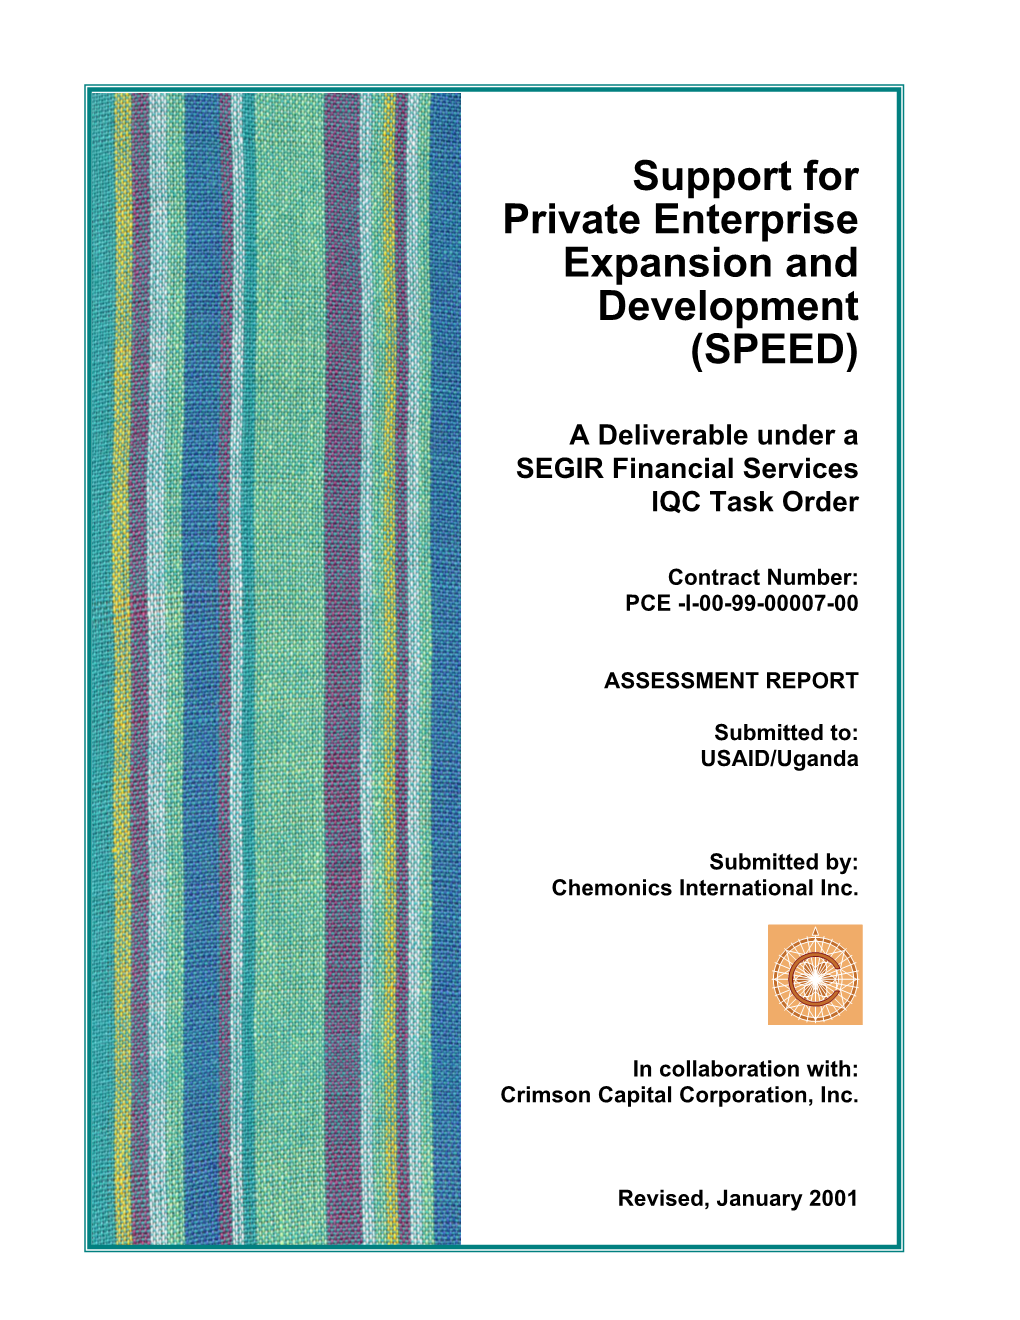 Support for Private Enterprise Expansion and Development (SPEED)